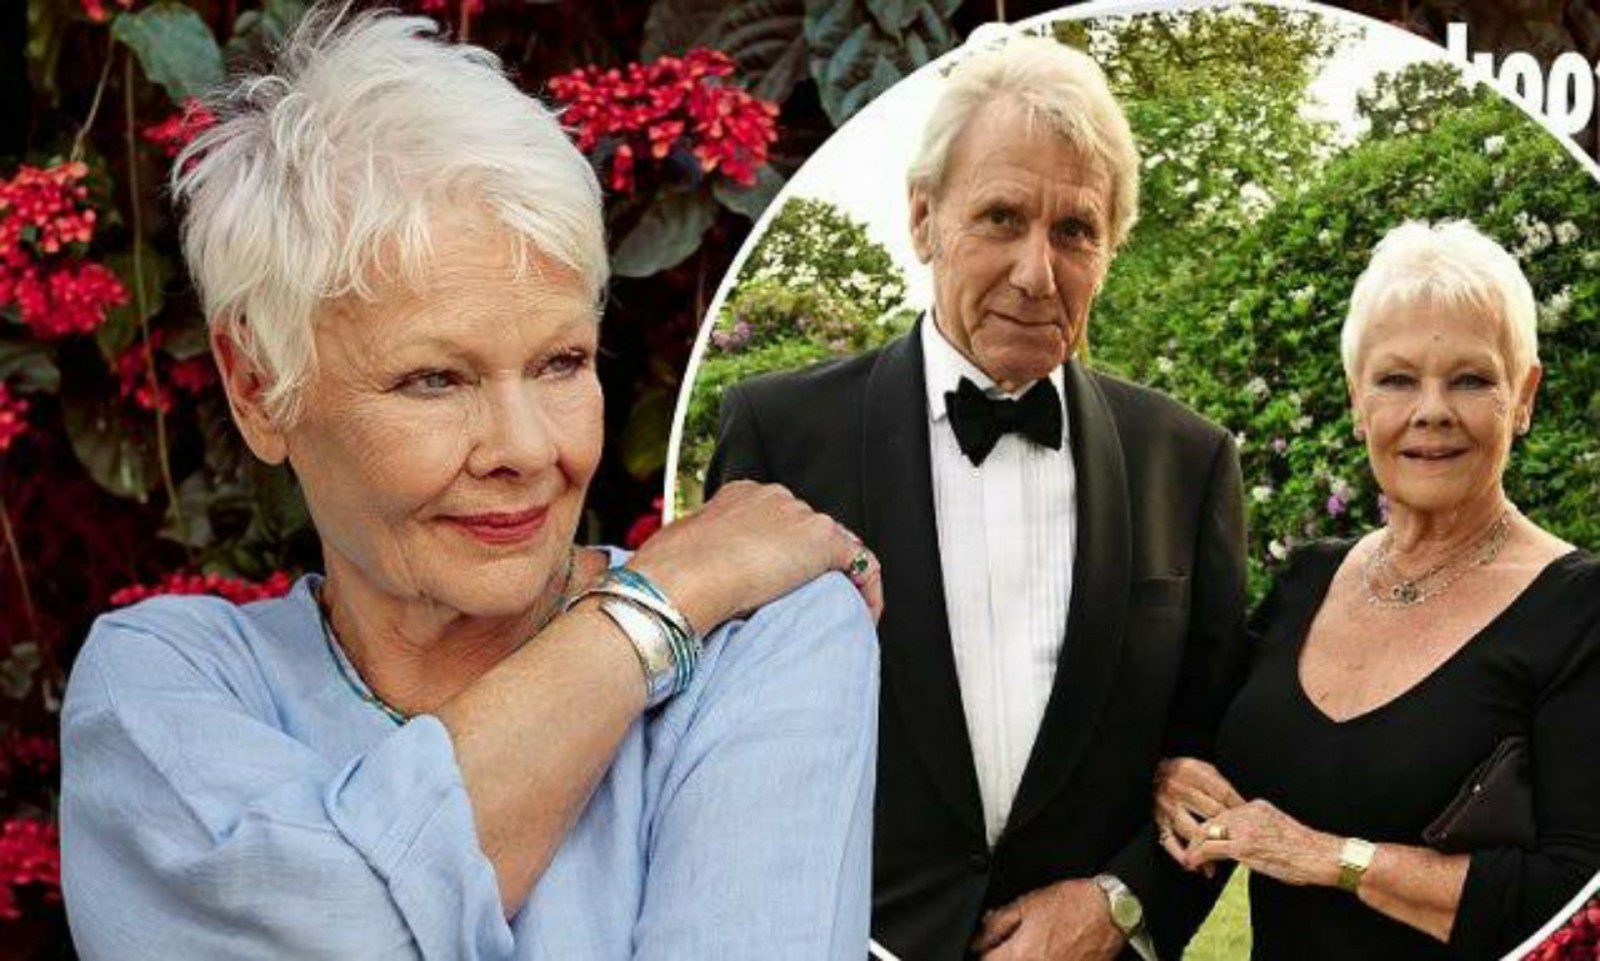 Who is Judi Dench's love interest?